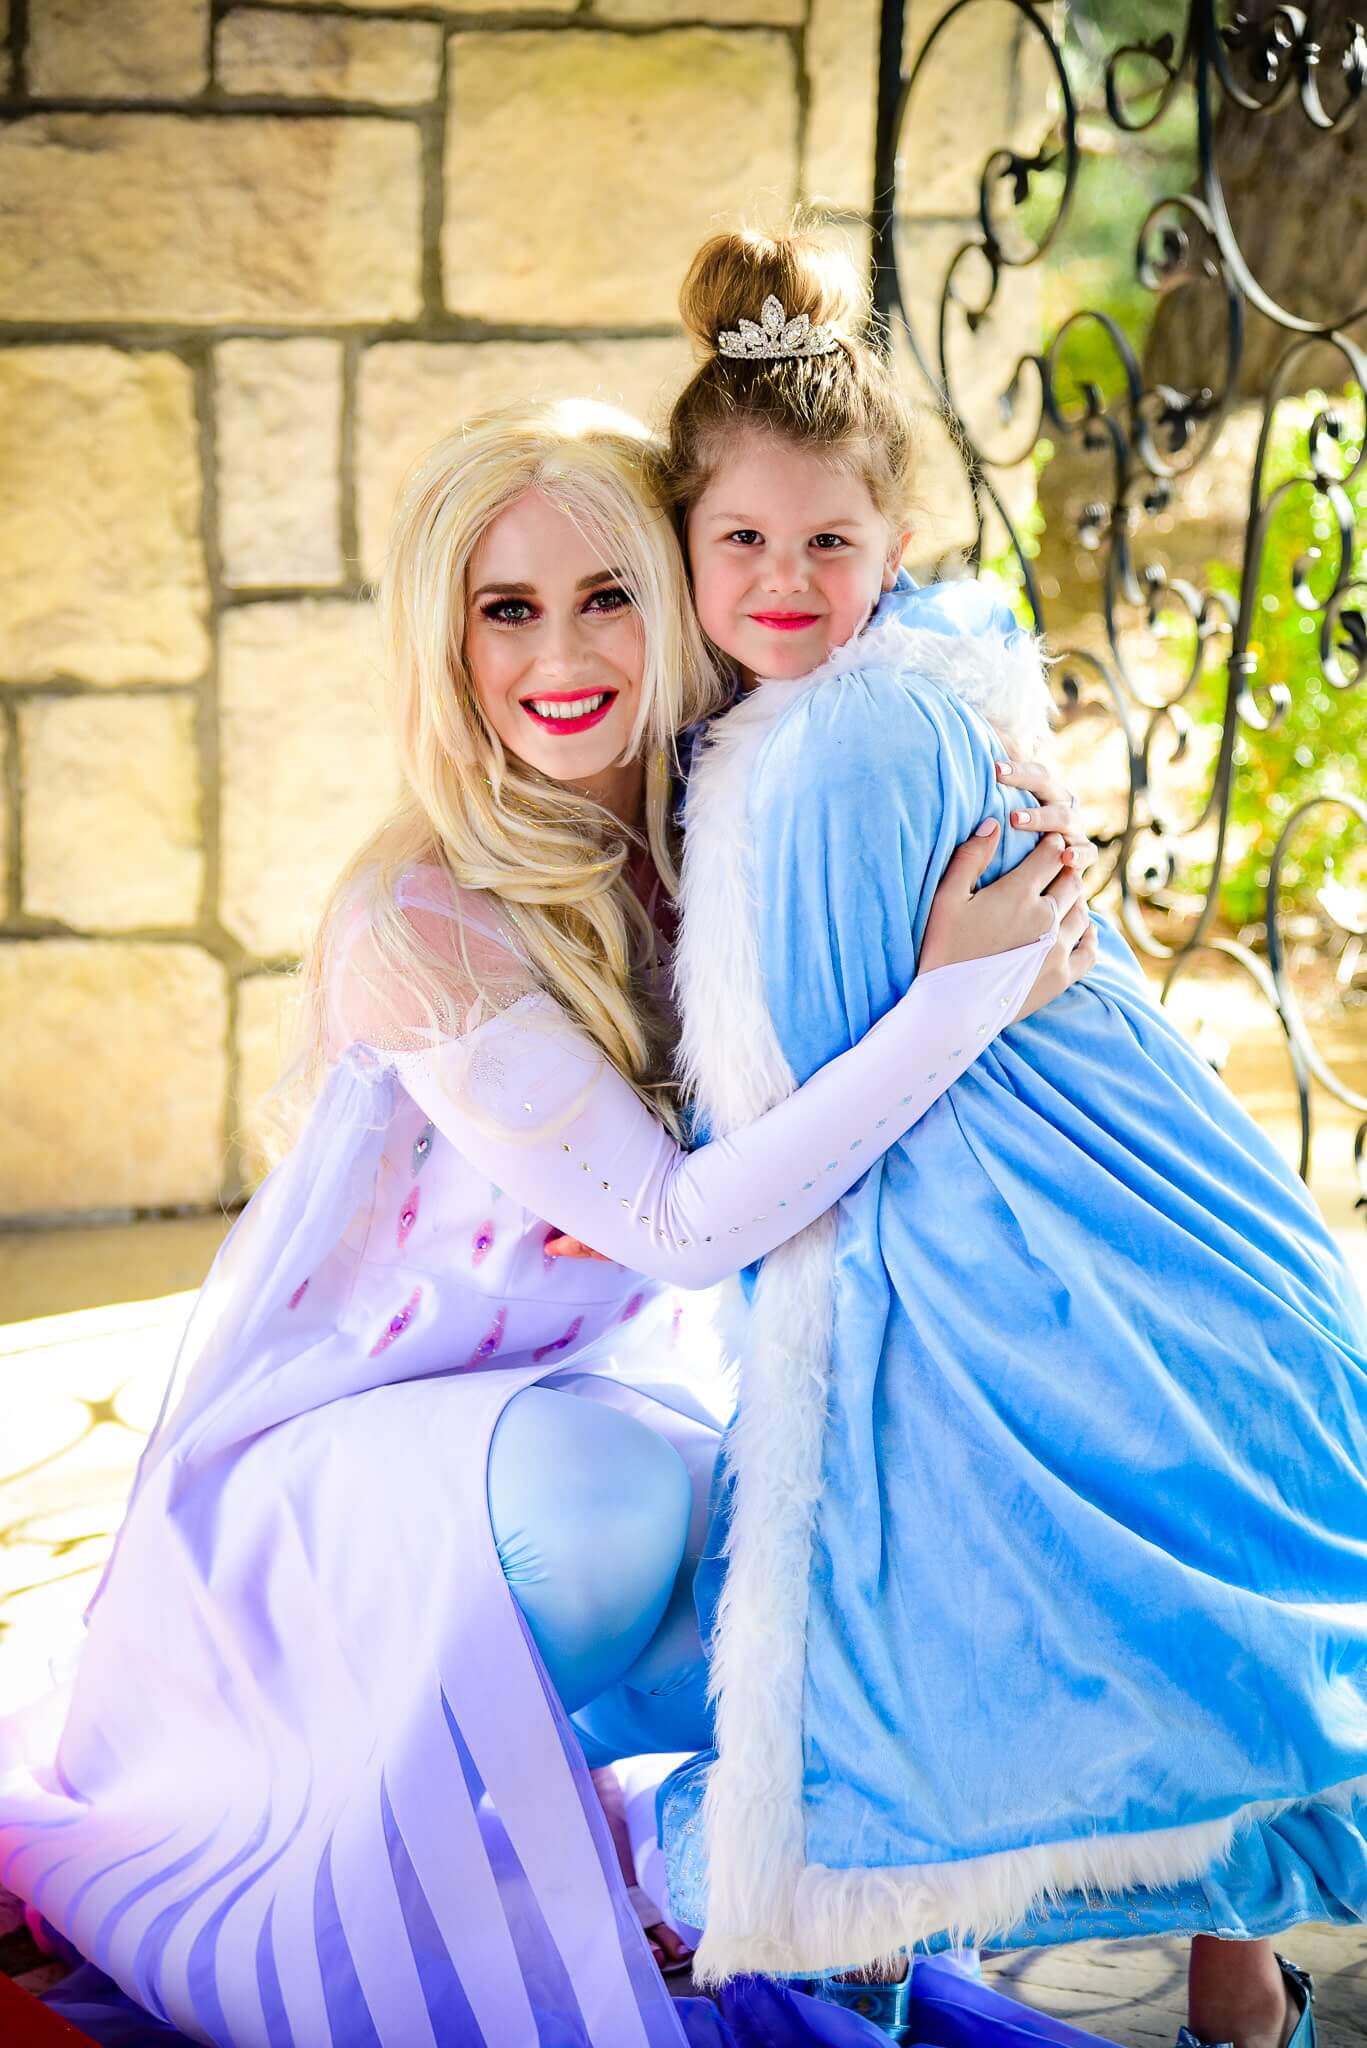 Elsa the Snow Queen with little girl